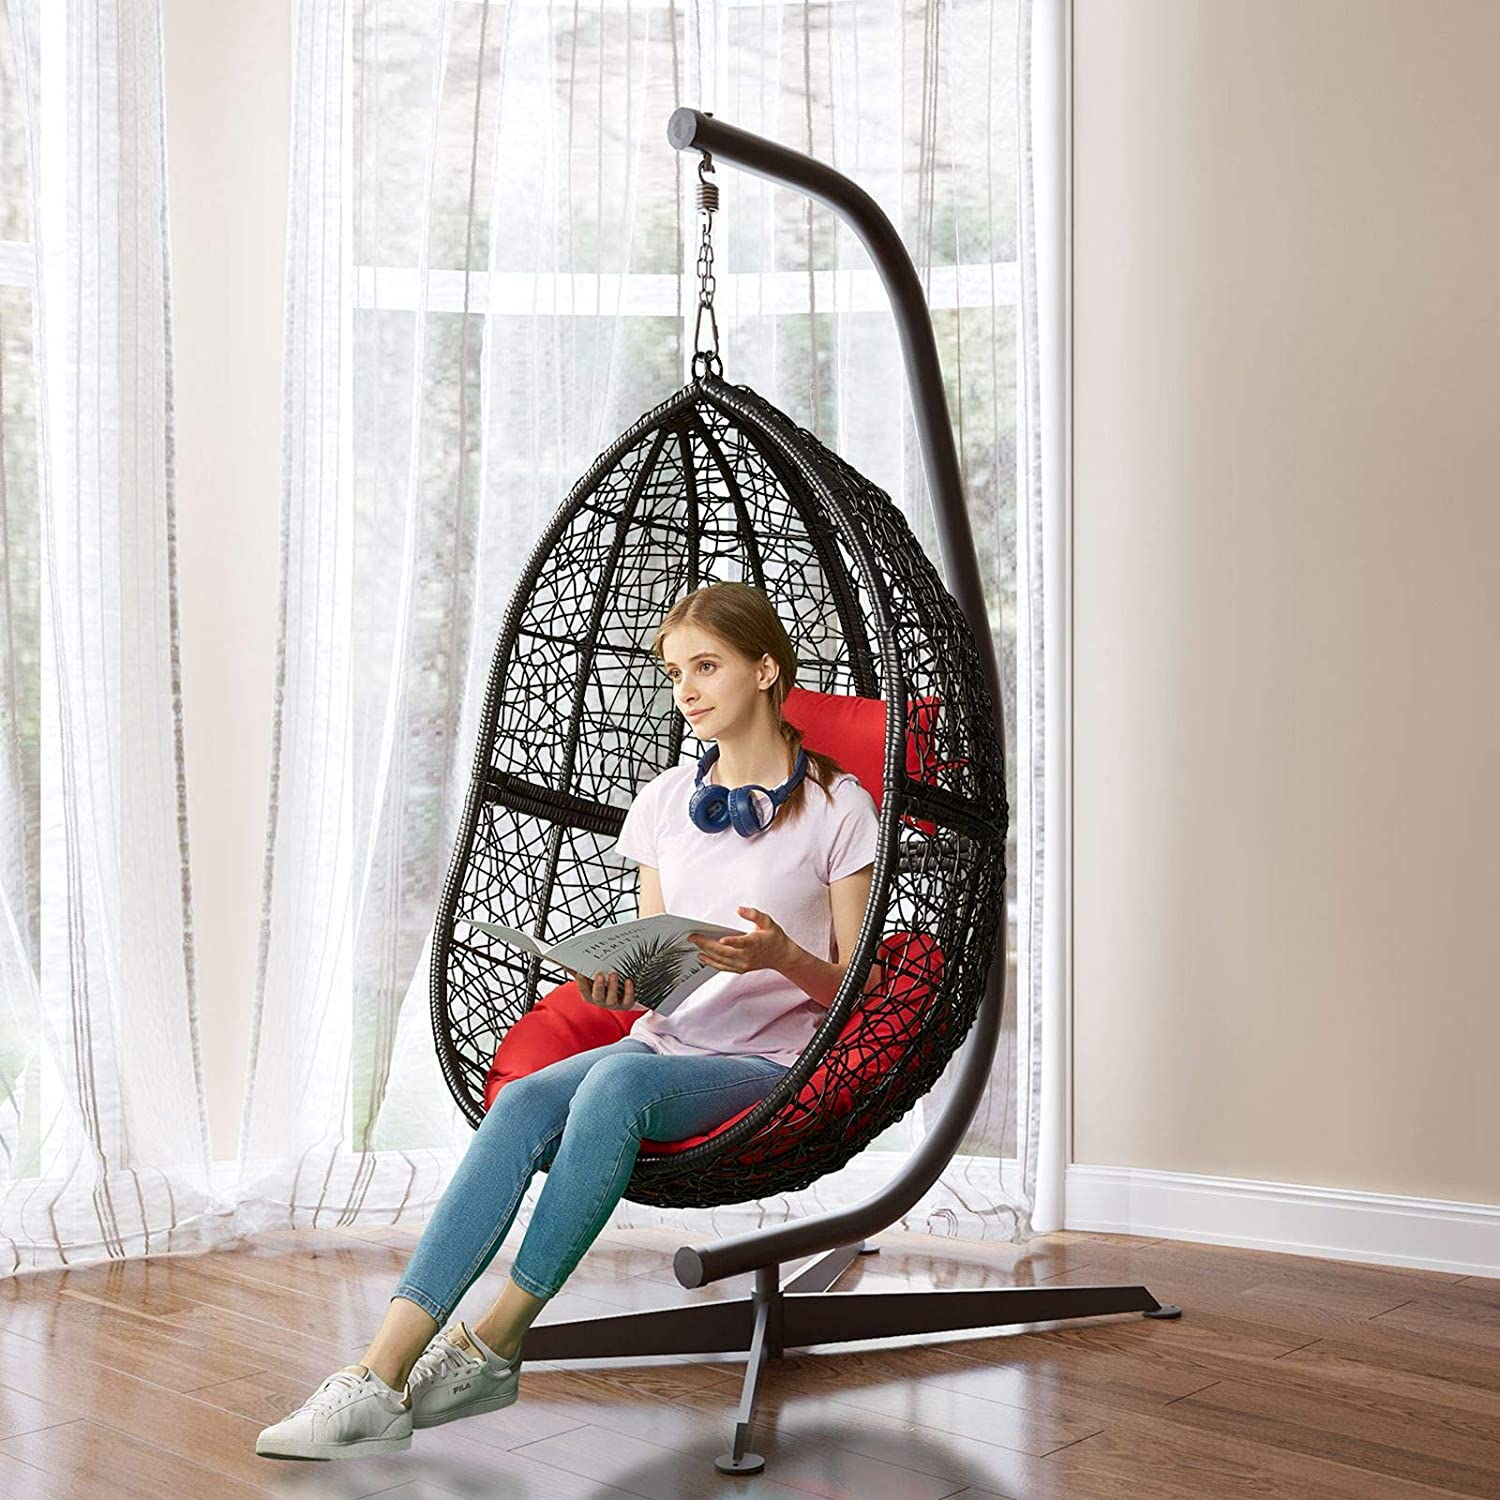 20 Best Budget Hanging Chairs that Worthy of Buying